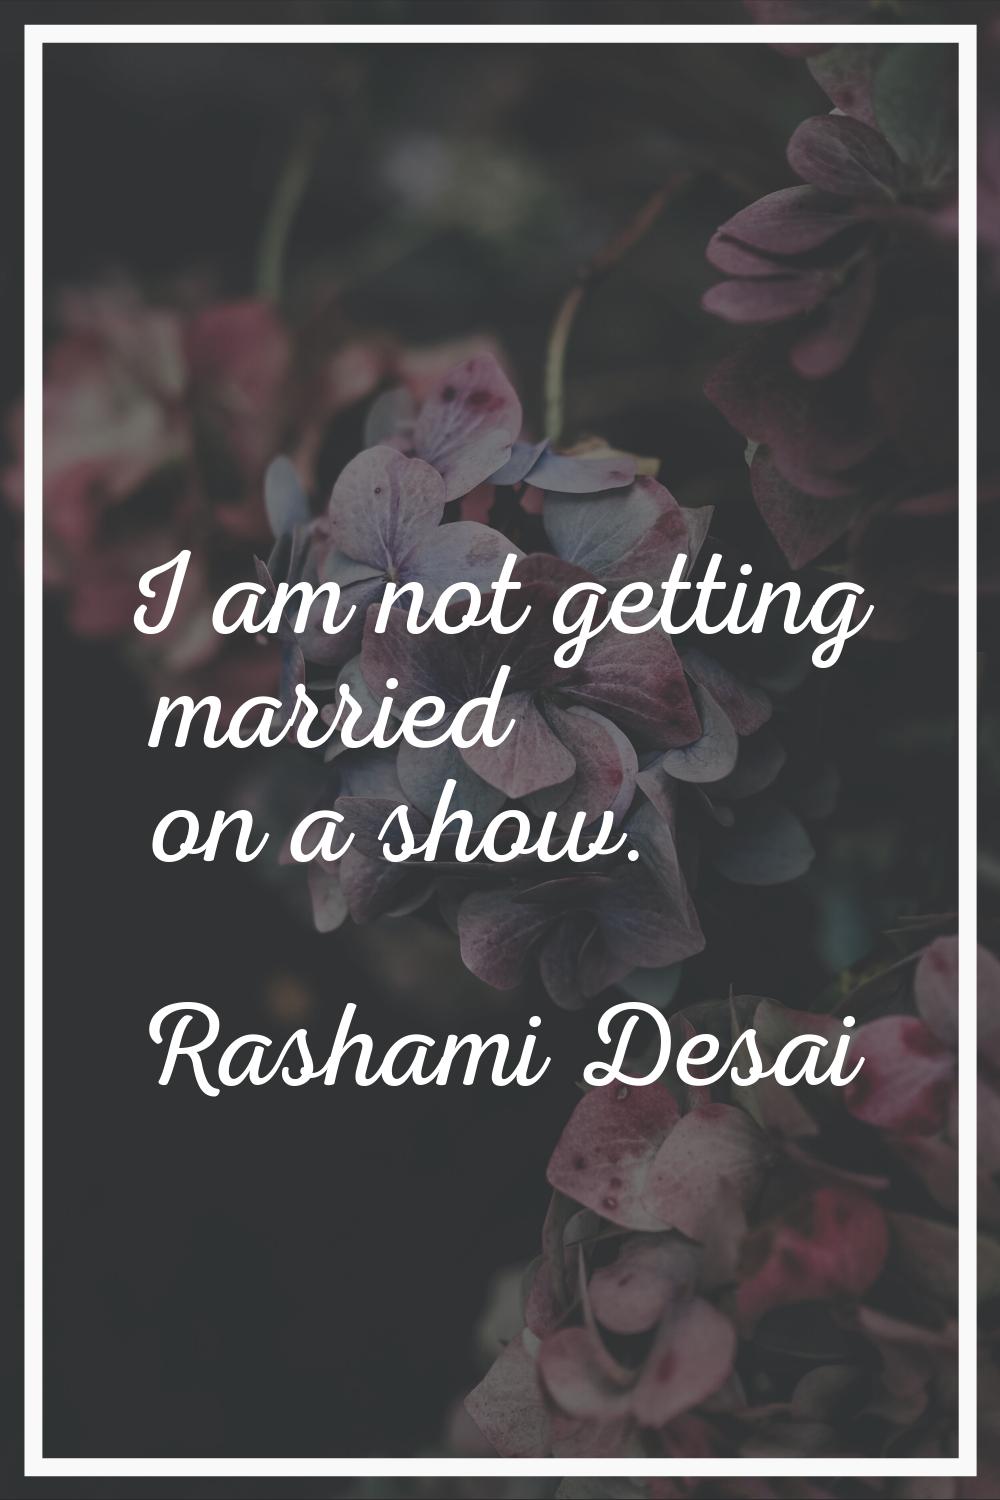 I am not getting married on a show.